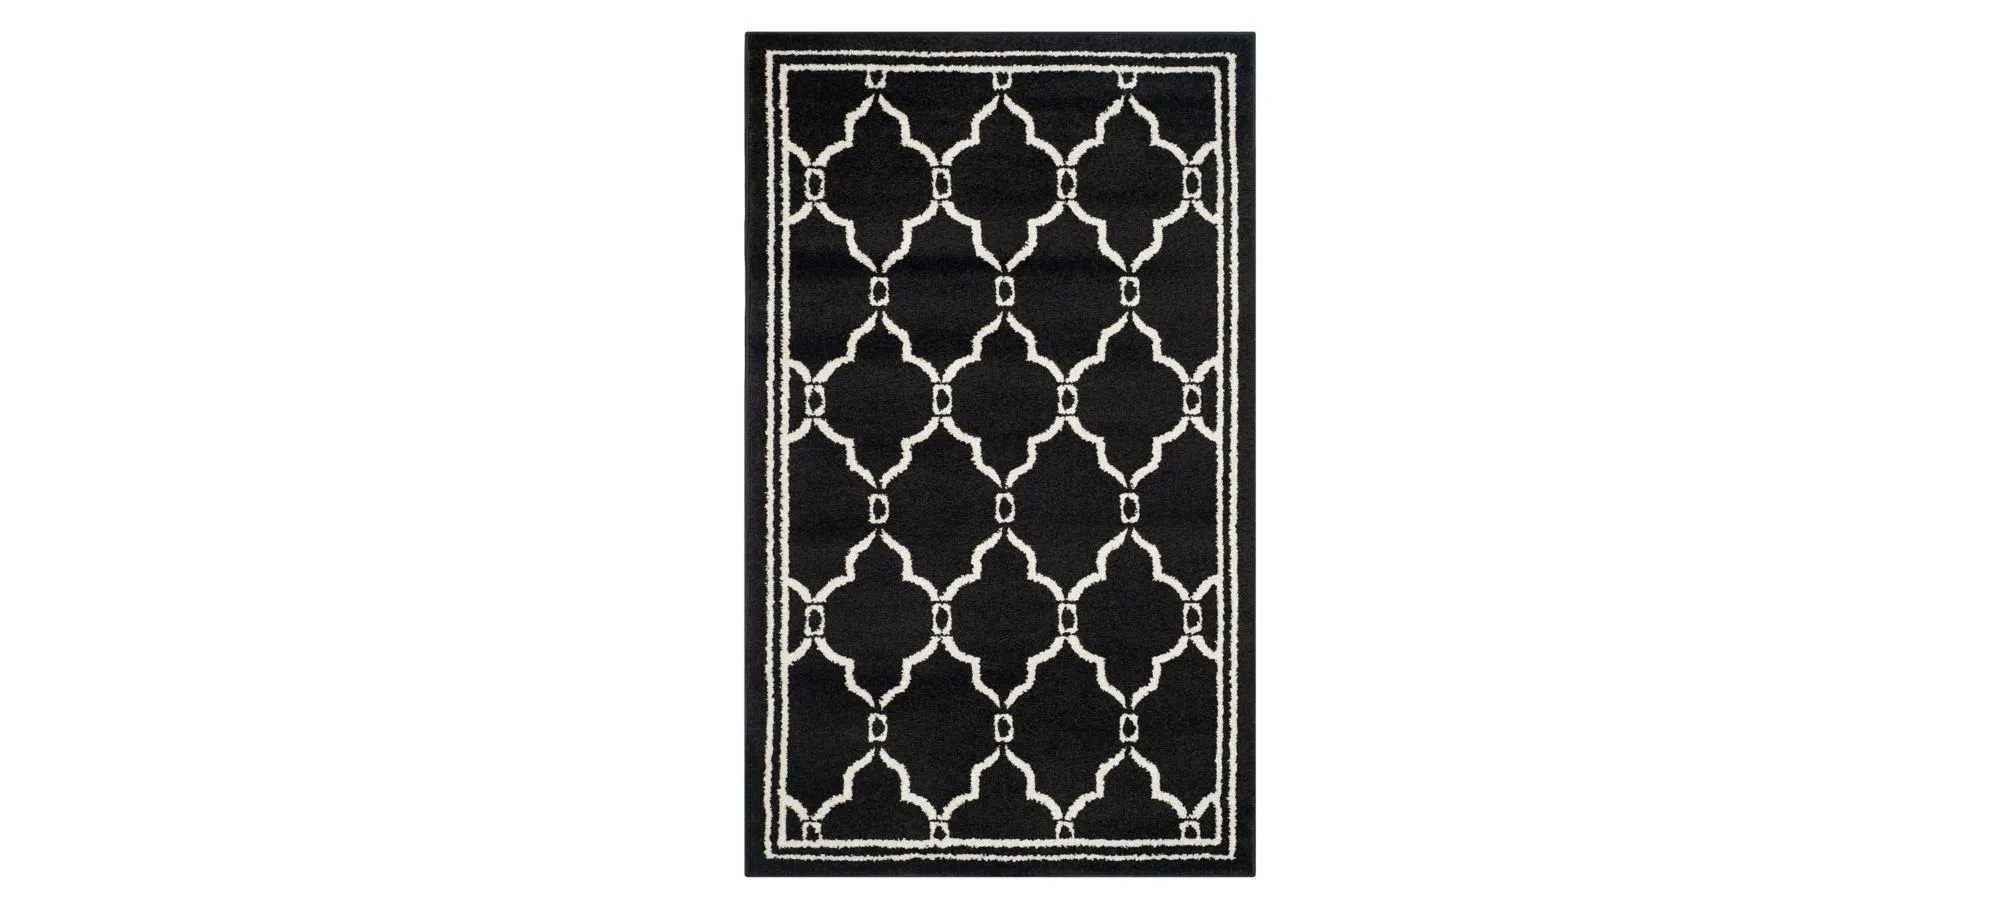 Amherst Area Rug in Anthracite/Ivory by Safavieh